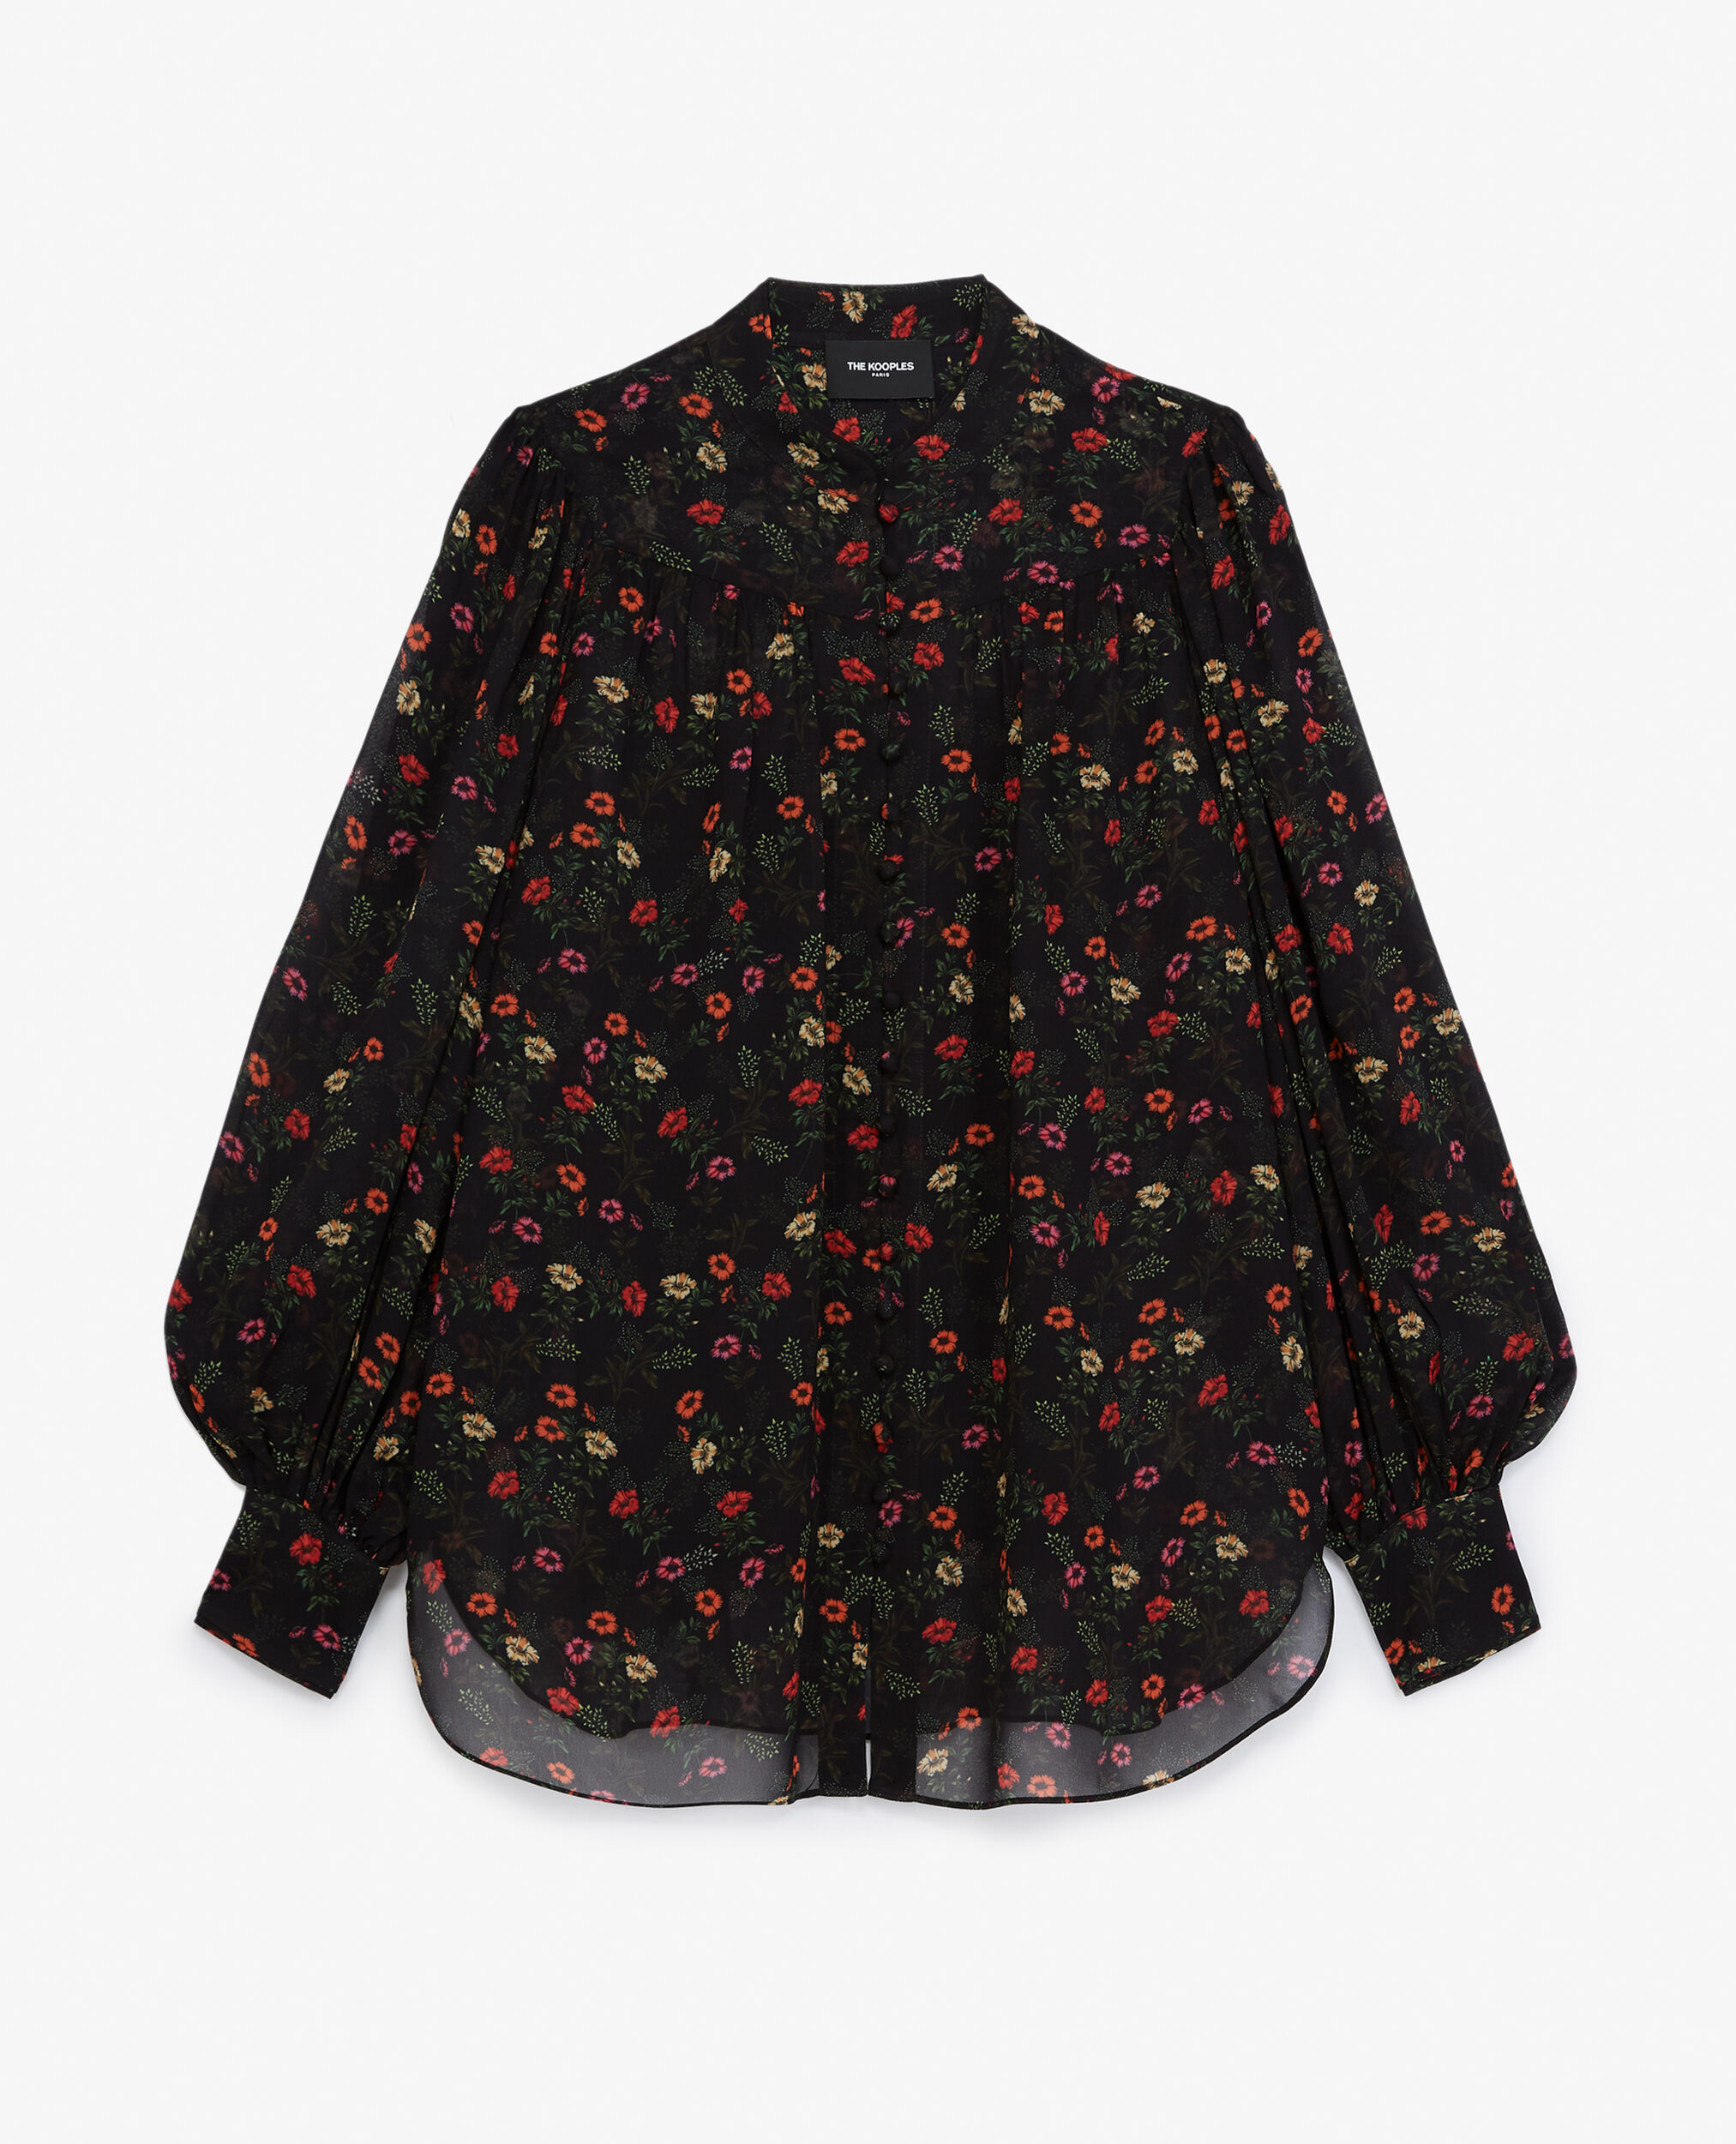 Flowing buttoned black top with floral print, MULTICOLOR, hi-res image number null